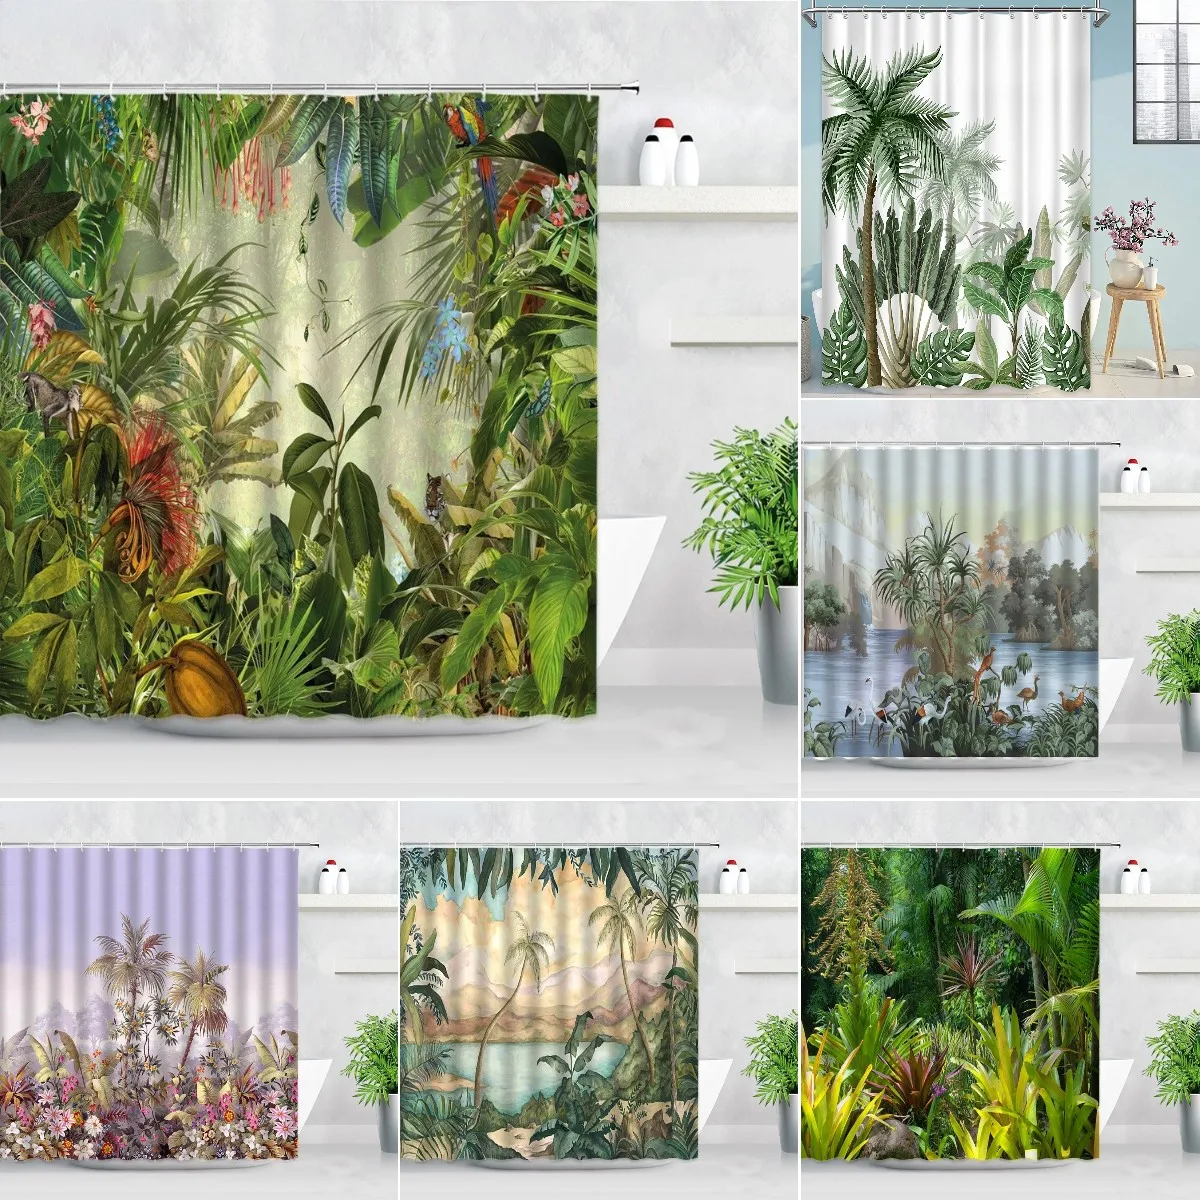 

Jungle Plants Shower Curtain Monkey Coconut Tree Palm Trees Leopard Parrot Green Leaves Scenery Bathroom Home Decor Curtains